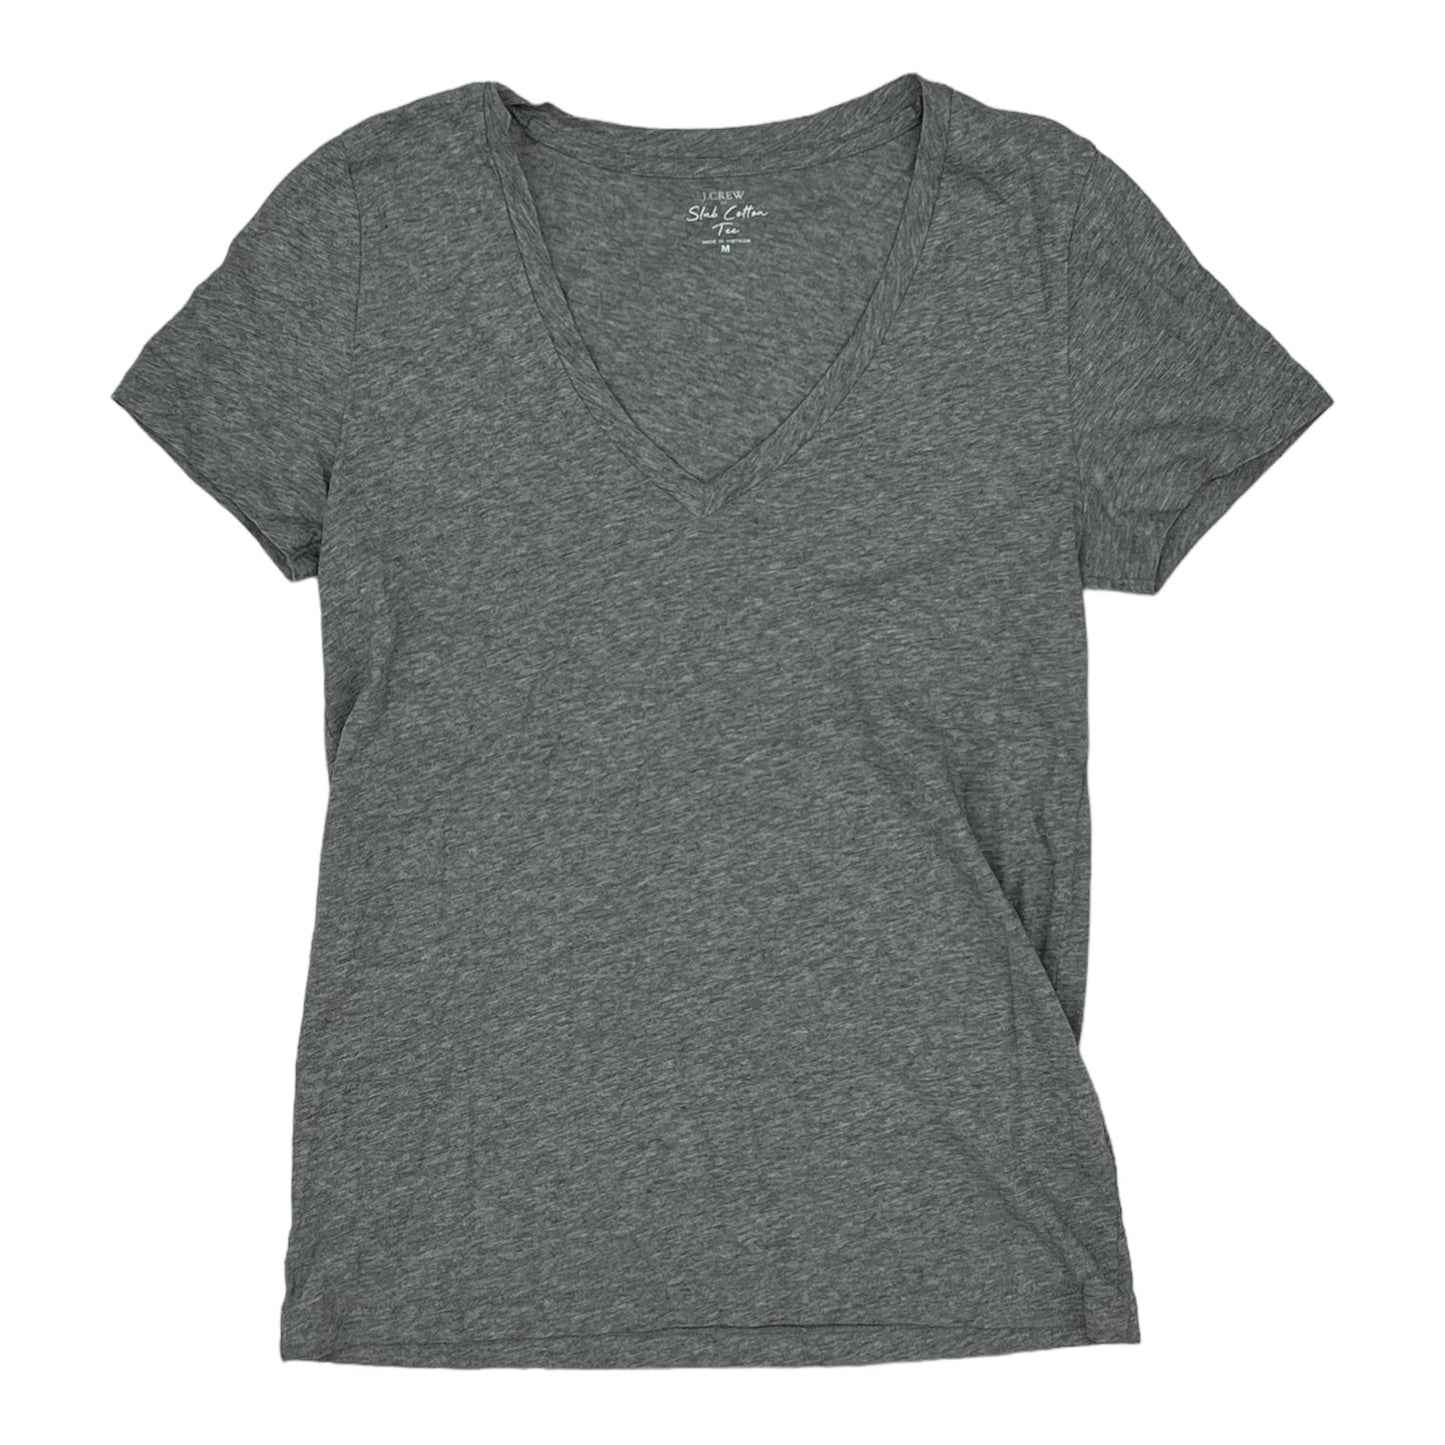 GREY TOP SS BASIC by J. CREW Size:M